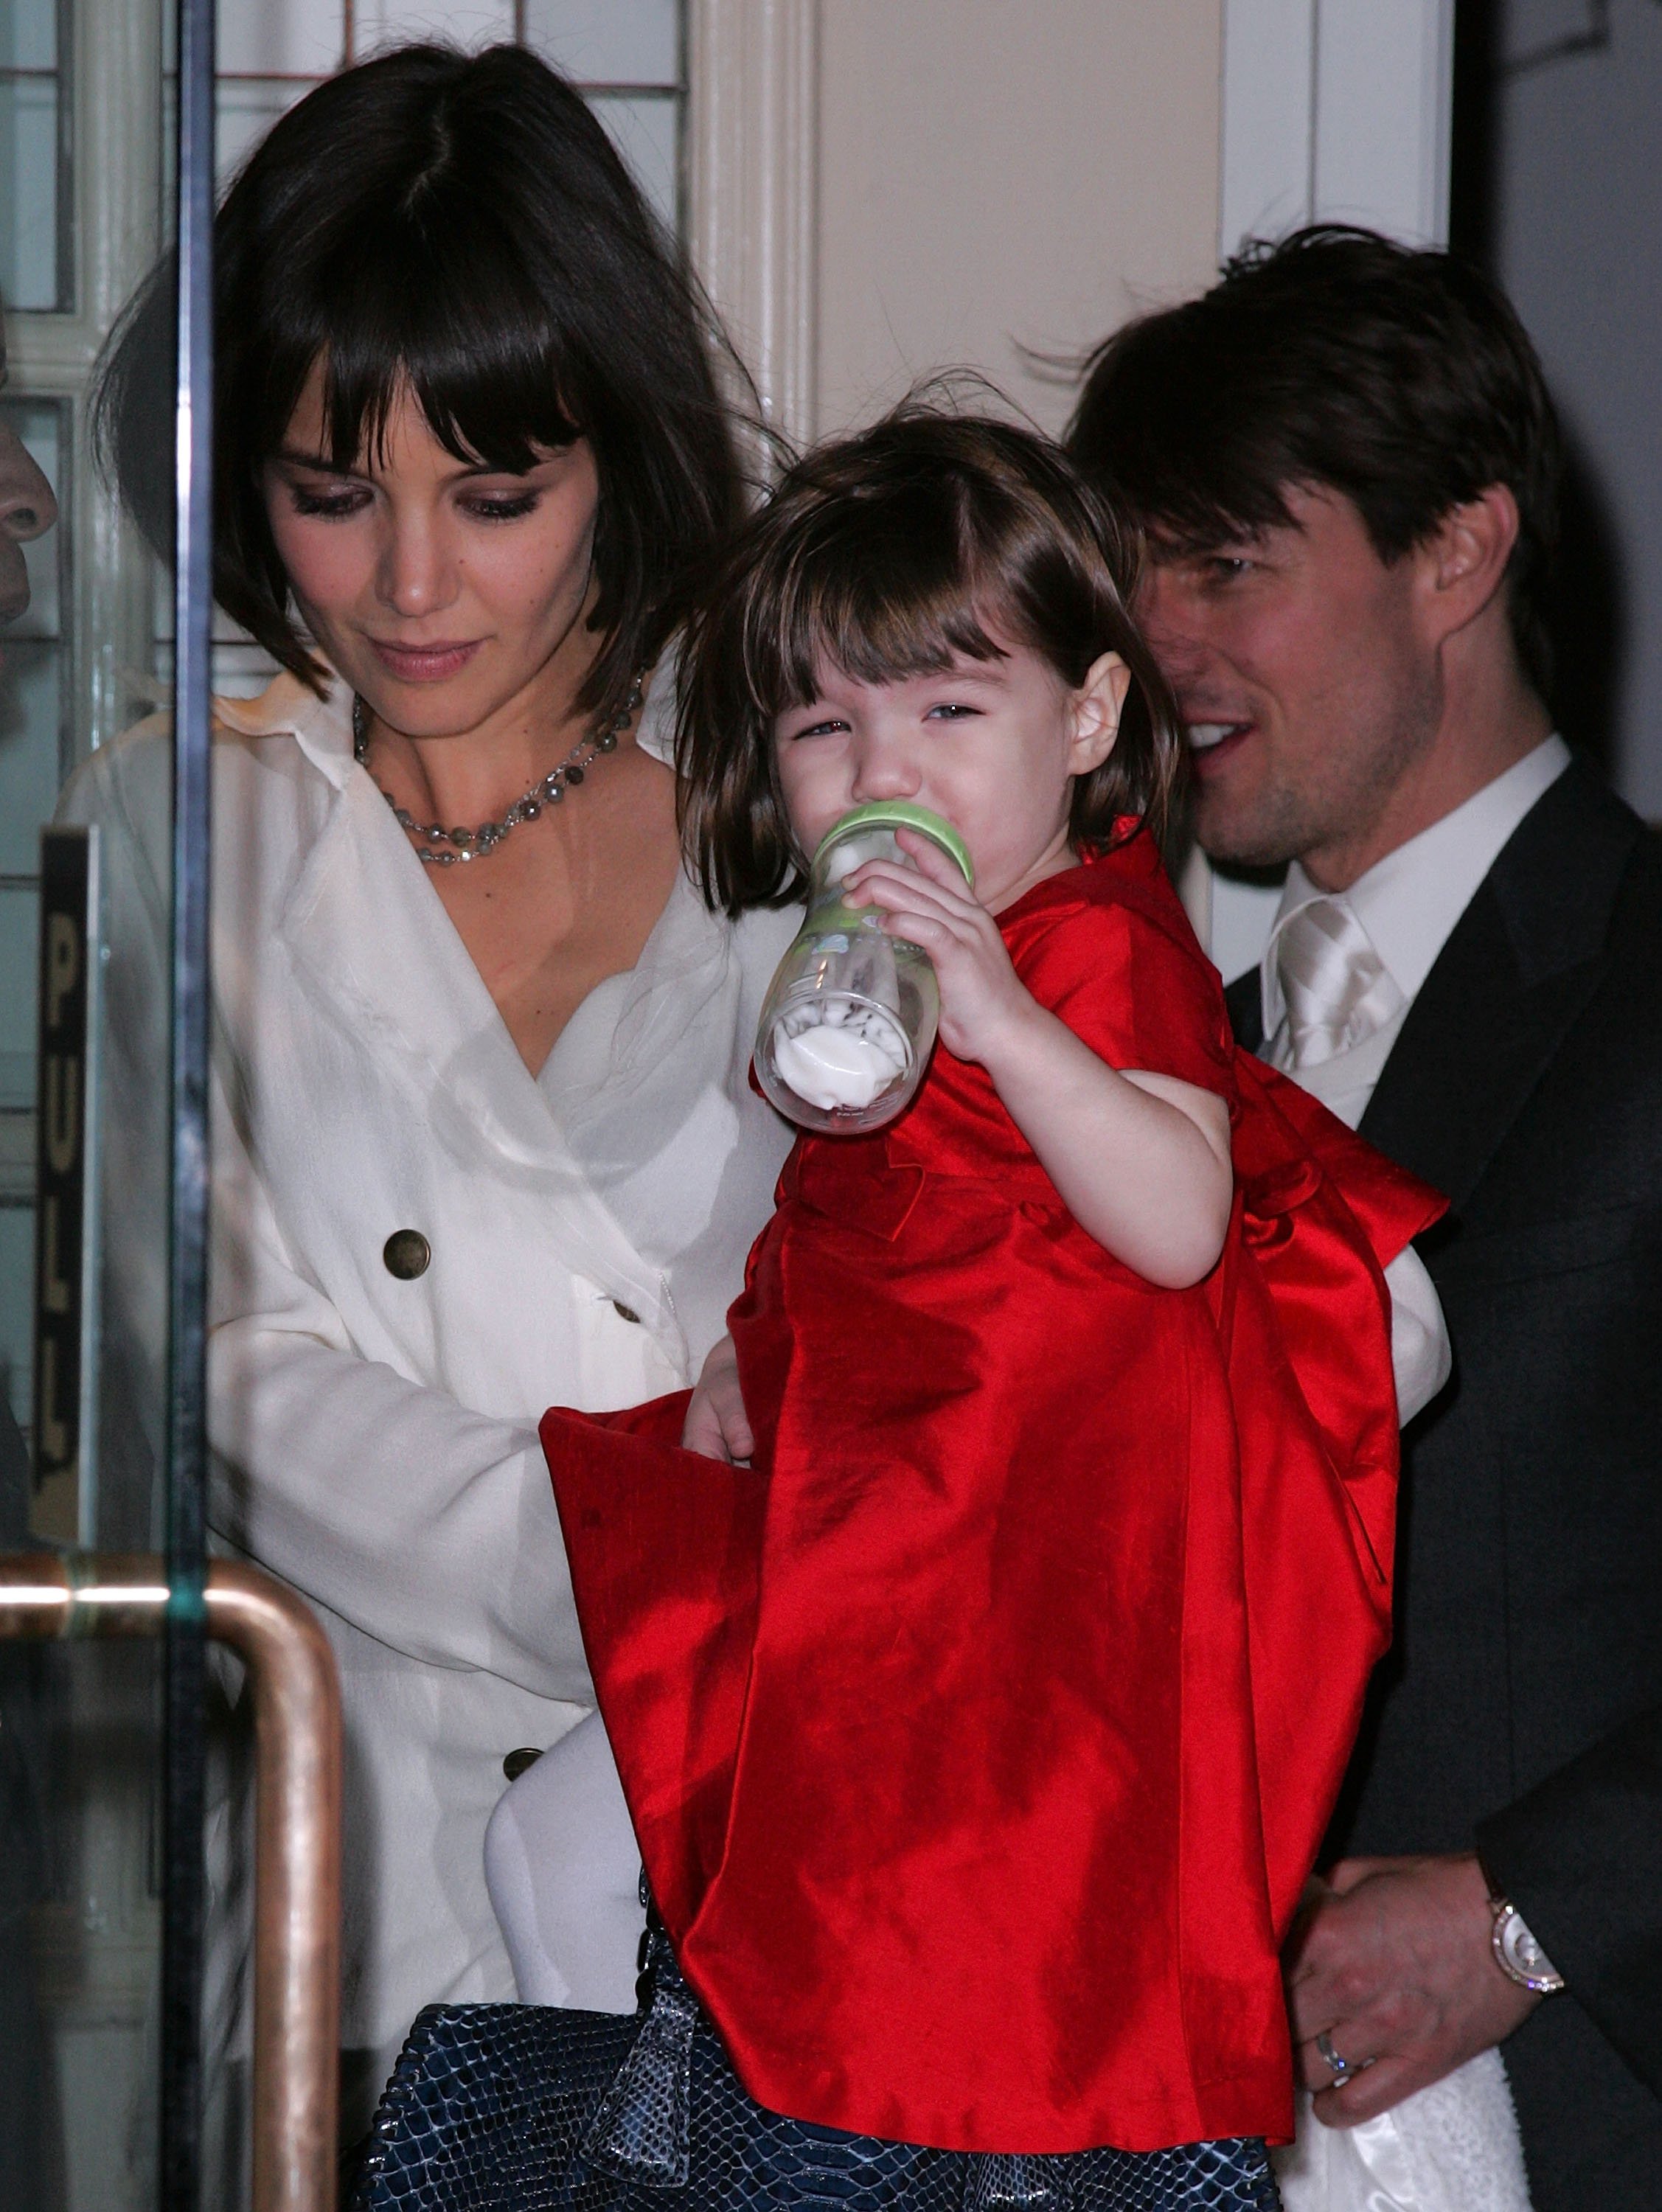 Actress Katie Holmes and actor Tom Cruise sighting with daughter Suri Cruise in New York City on January 14, 2008. | Source: Getty Images